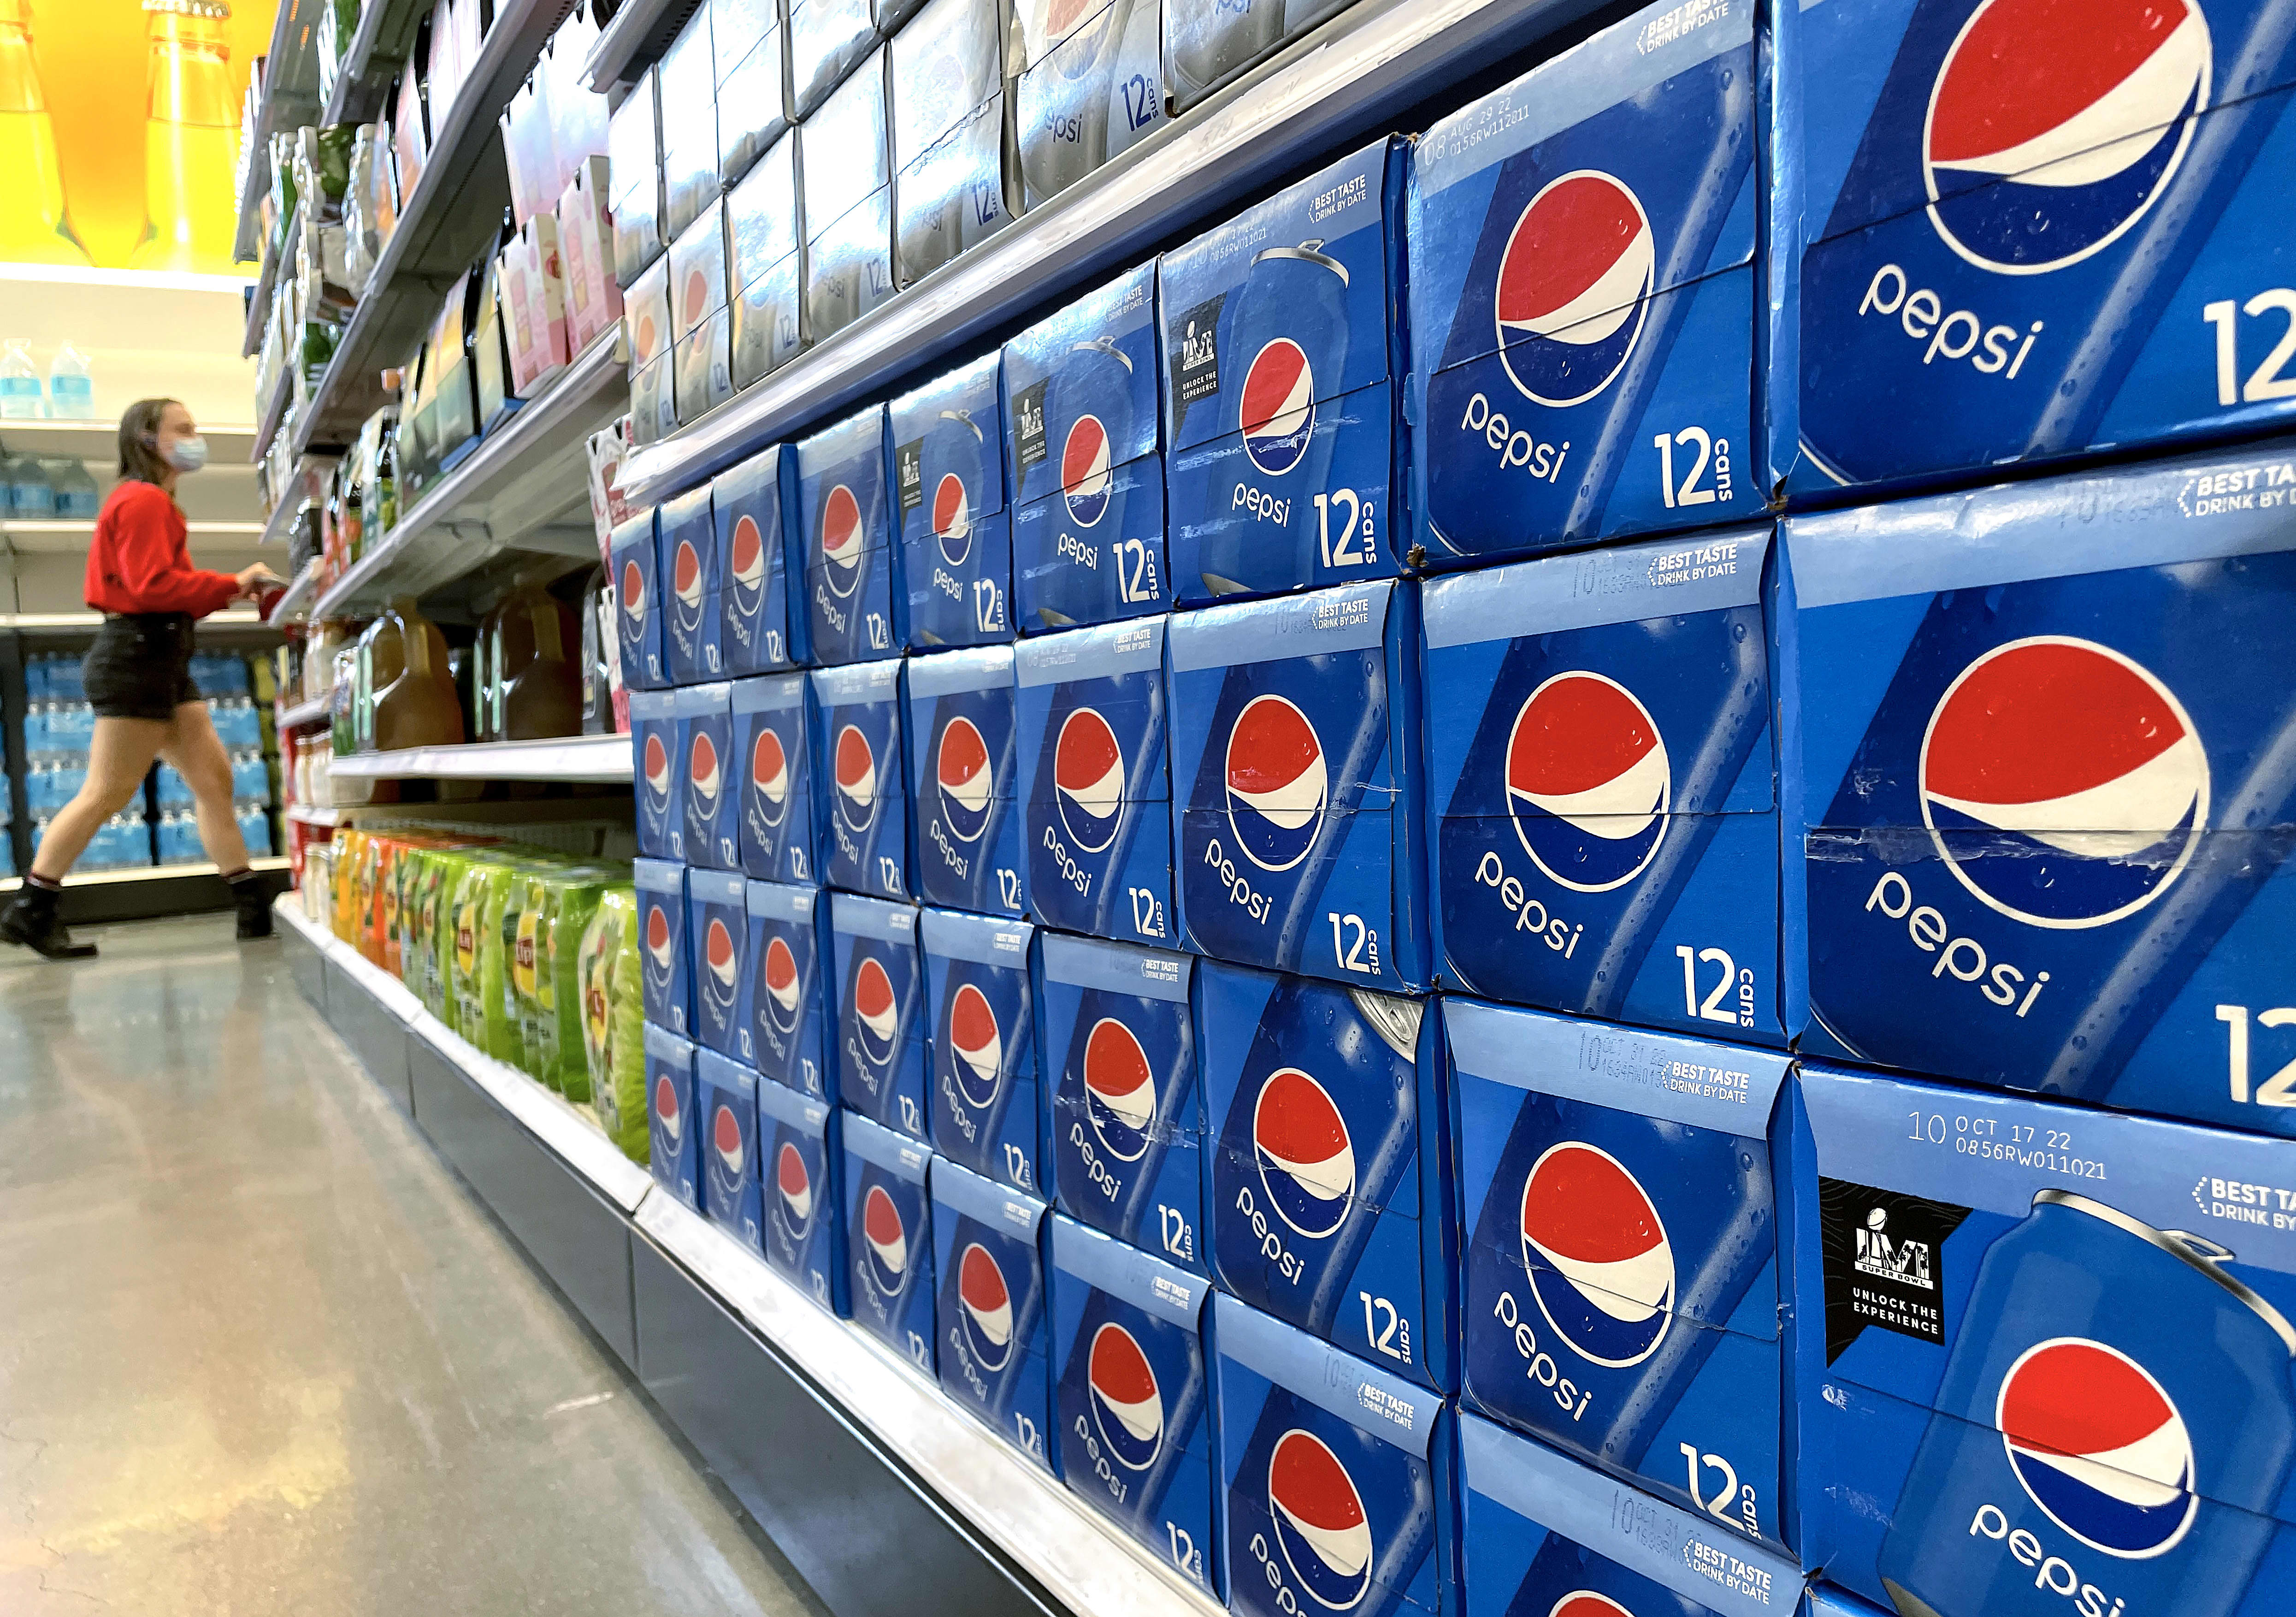 Morgan Stanley downgrades PepsiCo after earnings, says most good news is priced into the stock